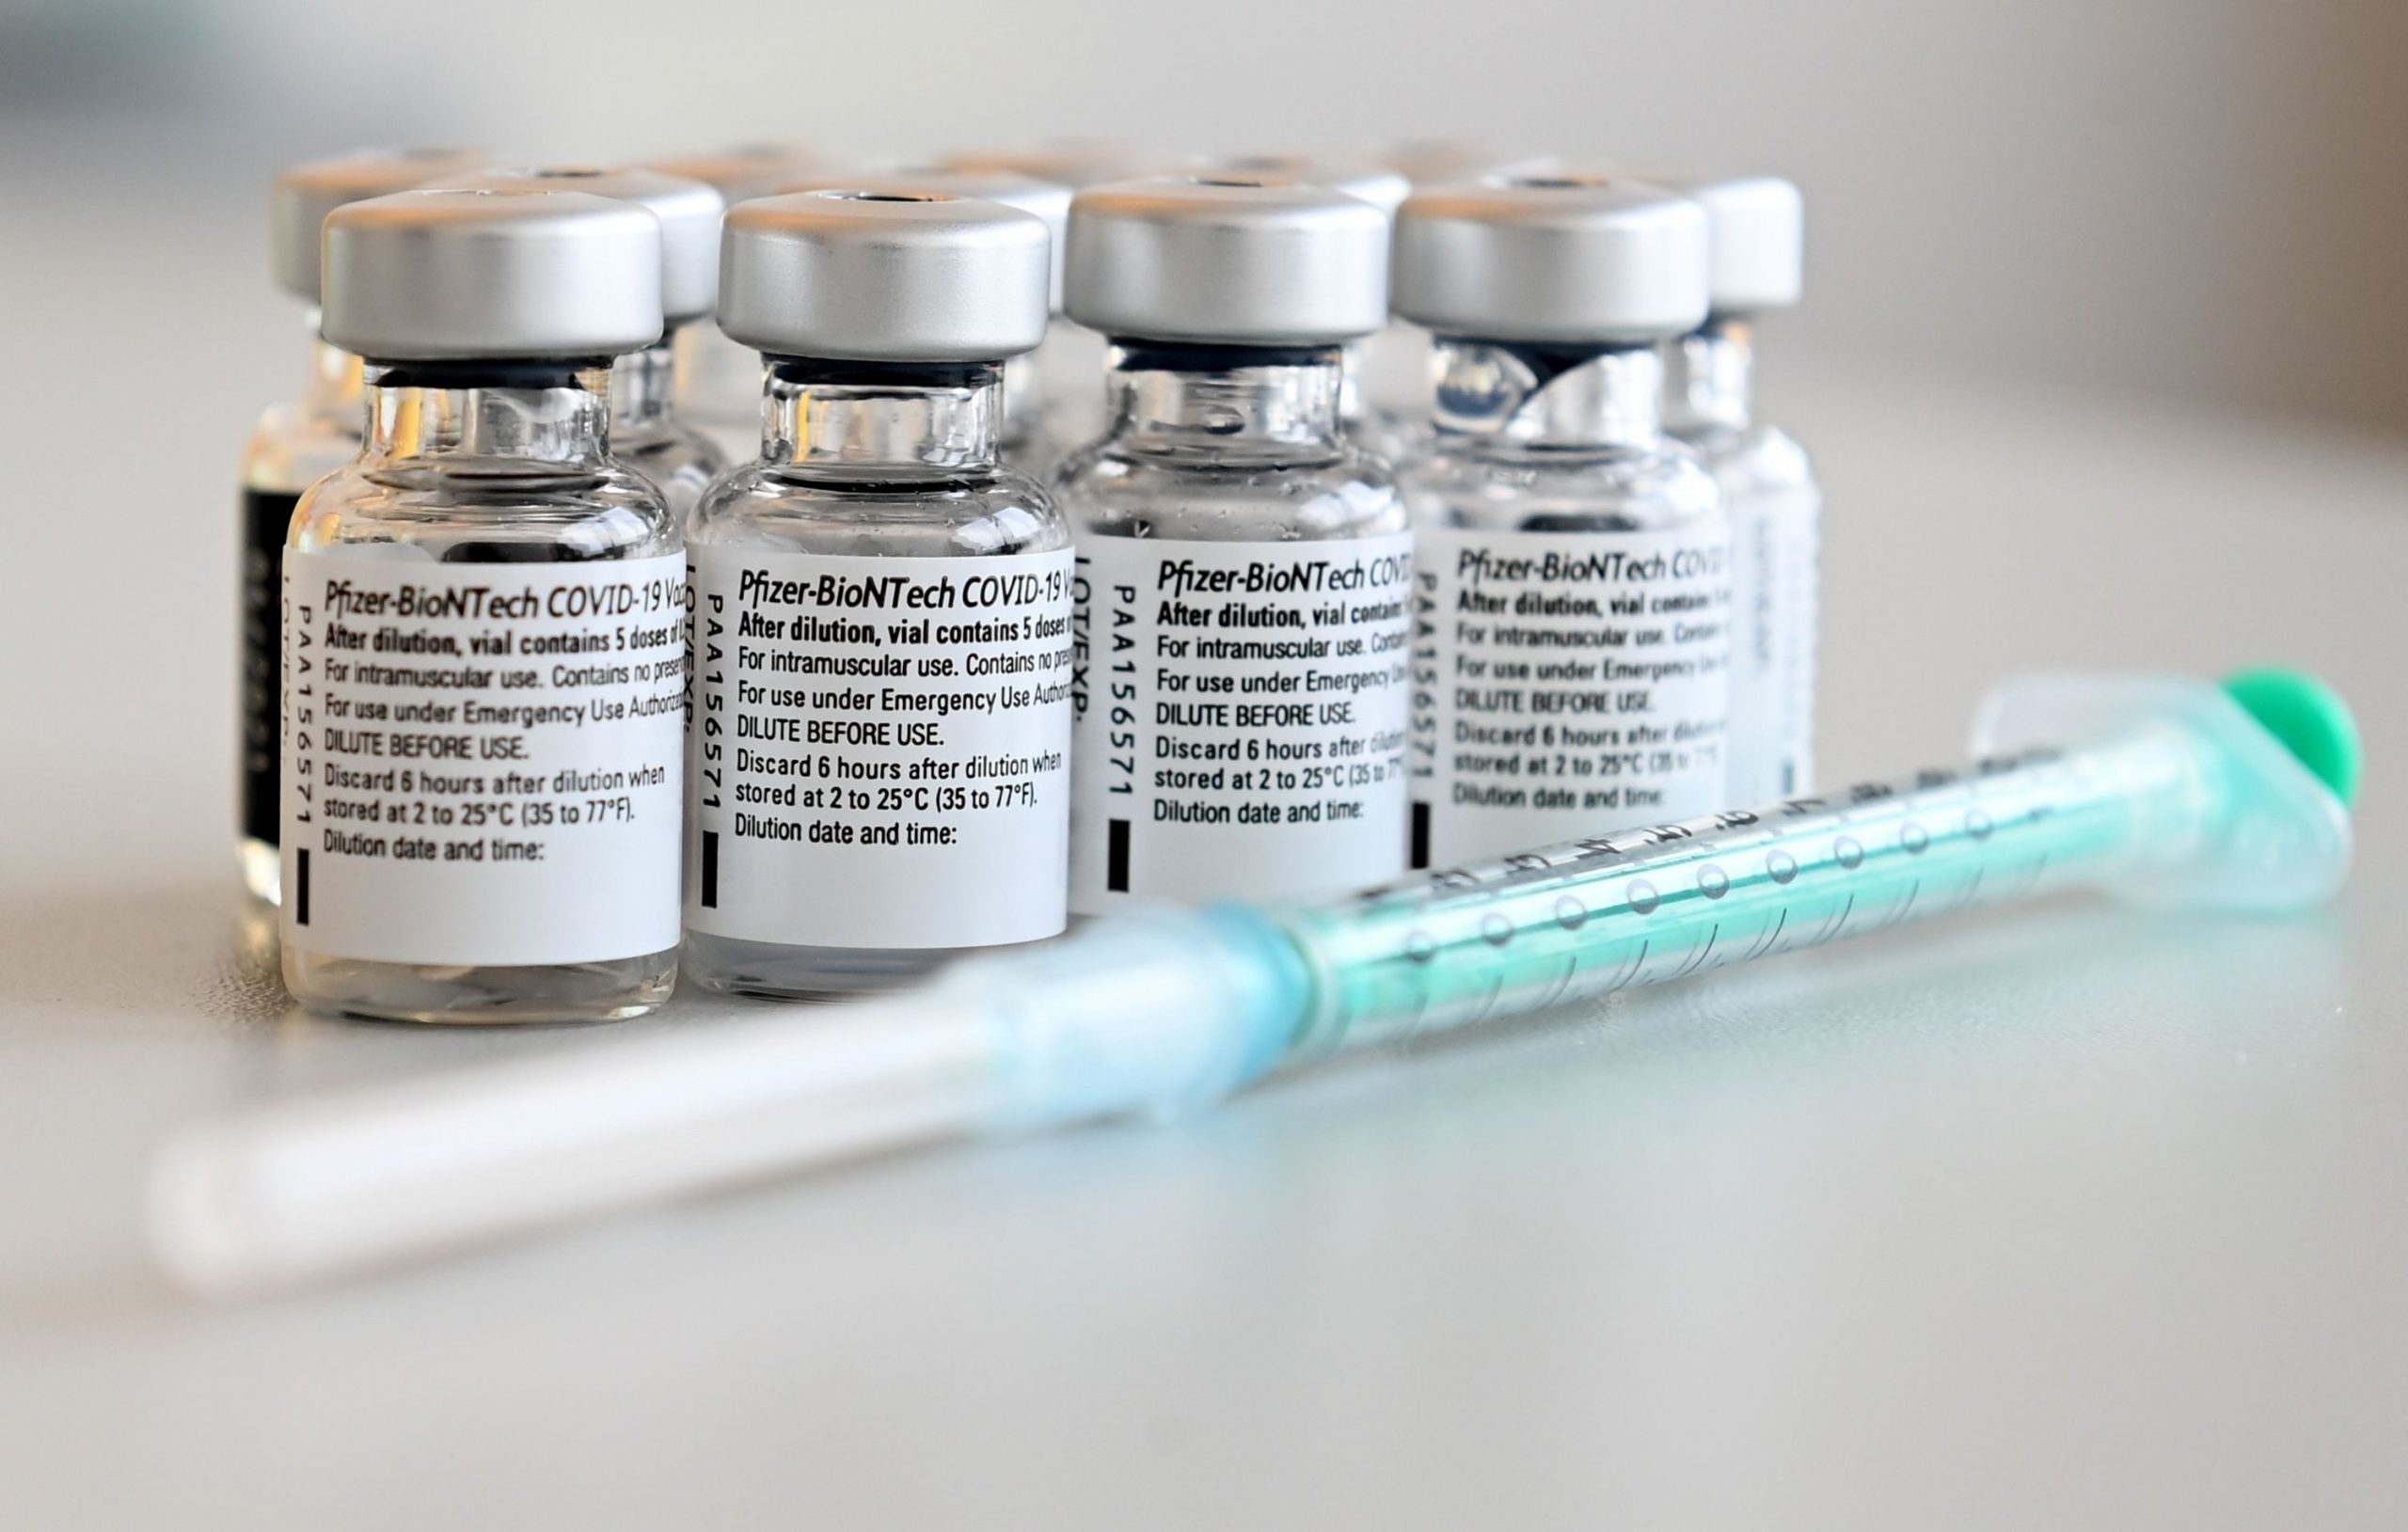 29 dead in Norway after getting vaccinated